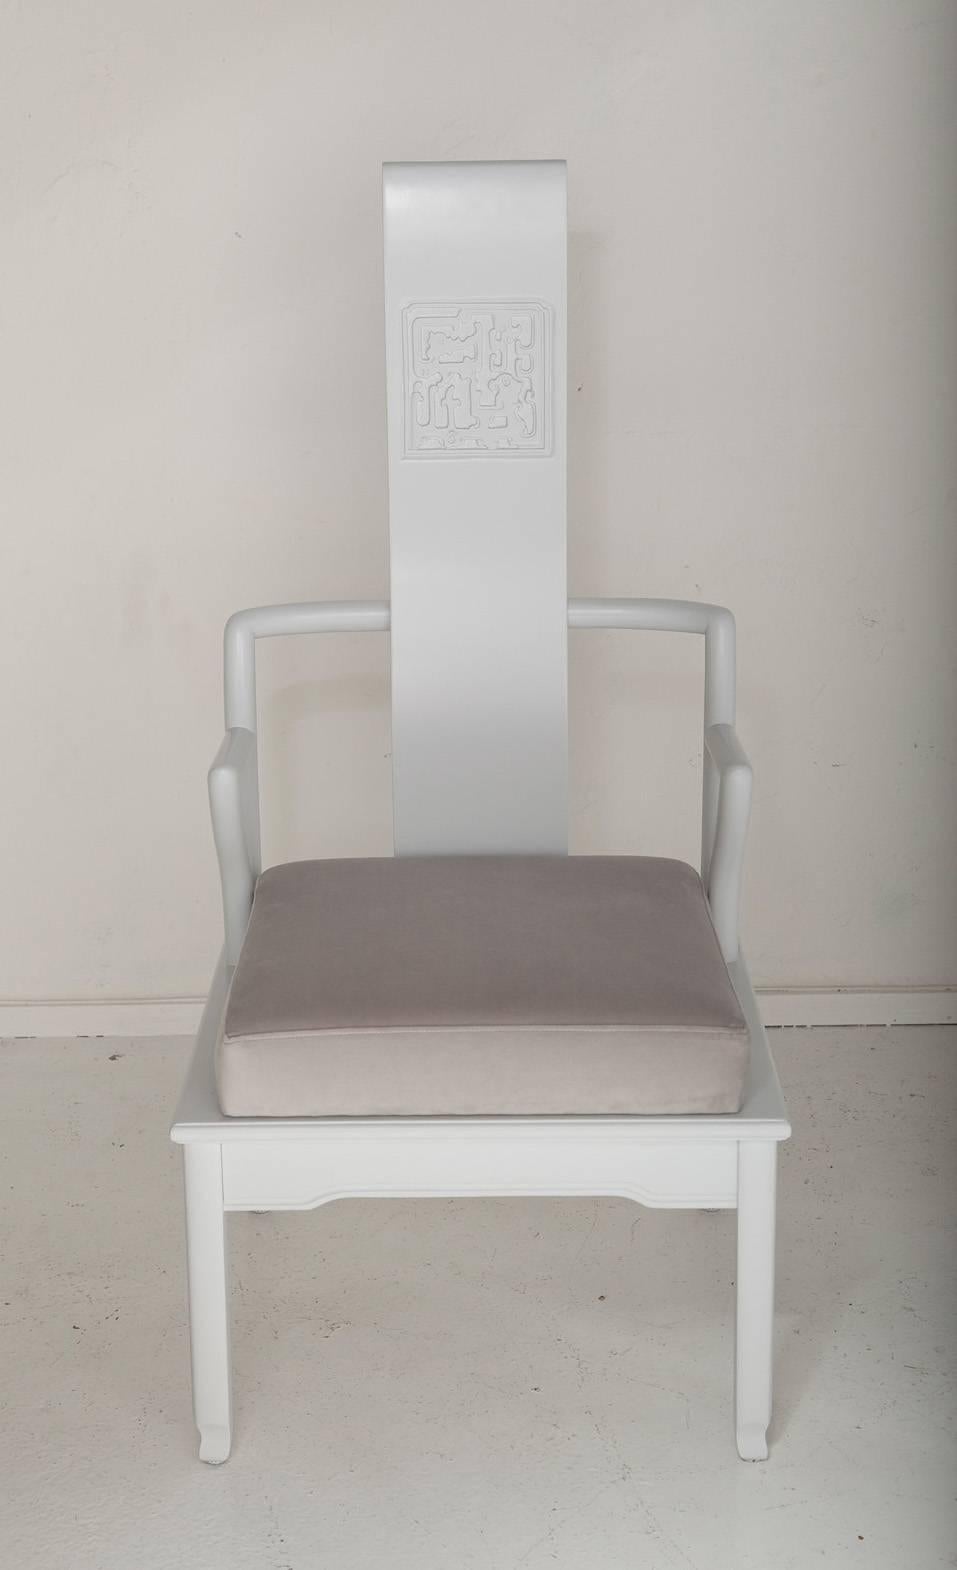 Pair of Low Asian Inspired Accent Chairs in the Manner of James Mont In Excellent Condition For Sale In North Miami, FL